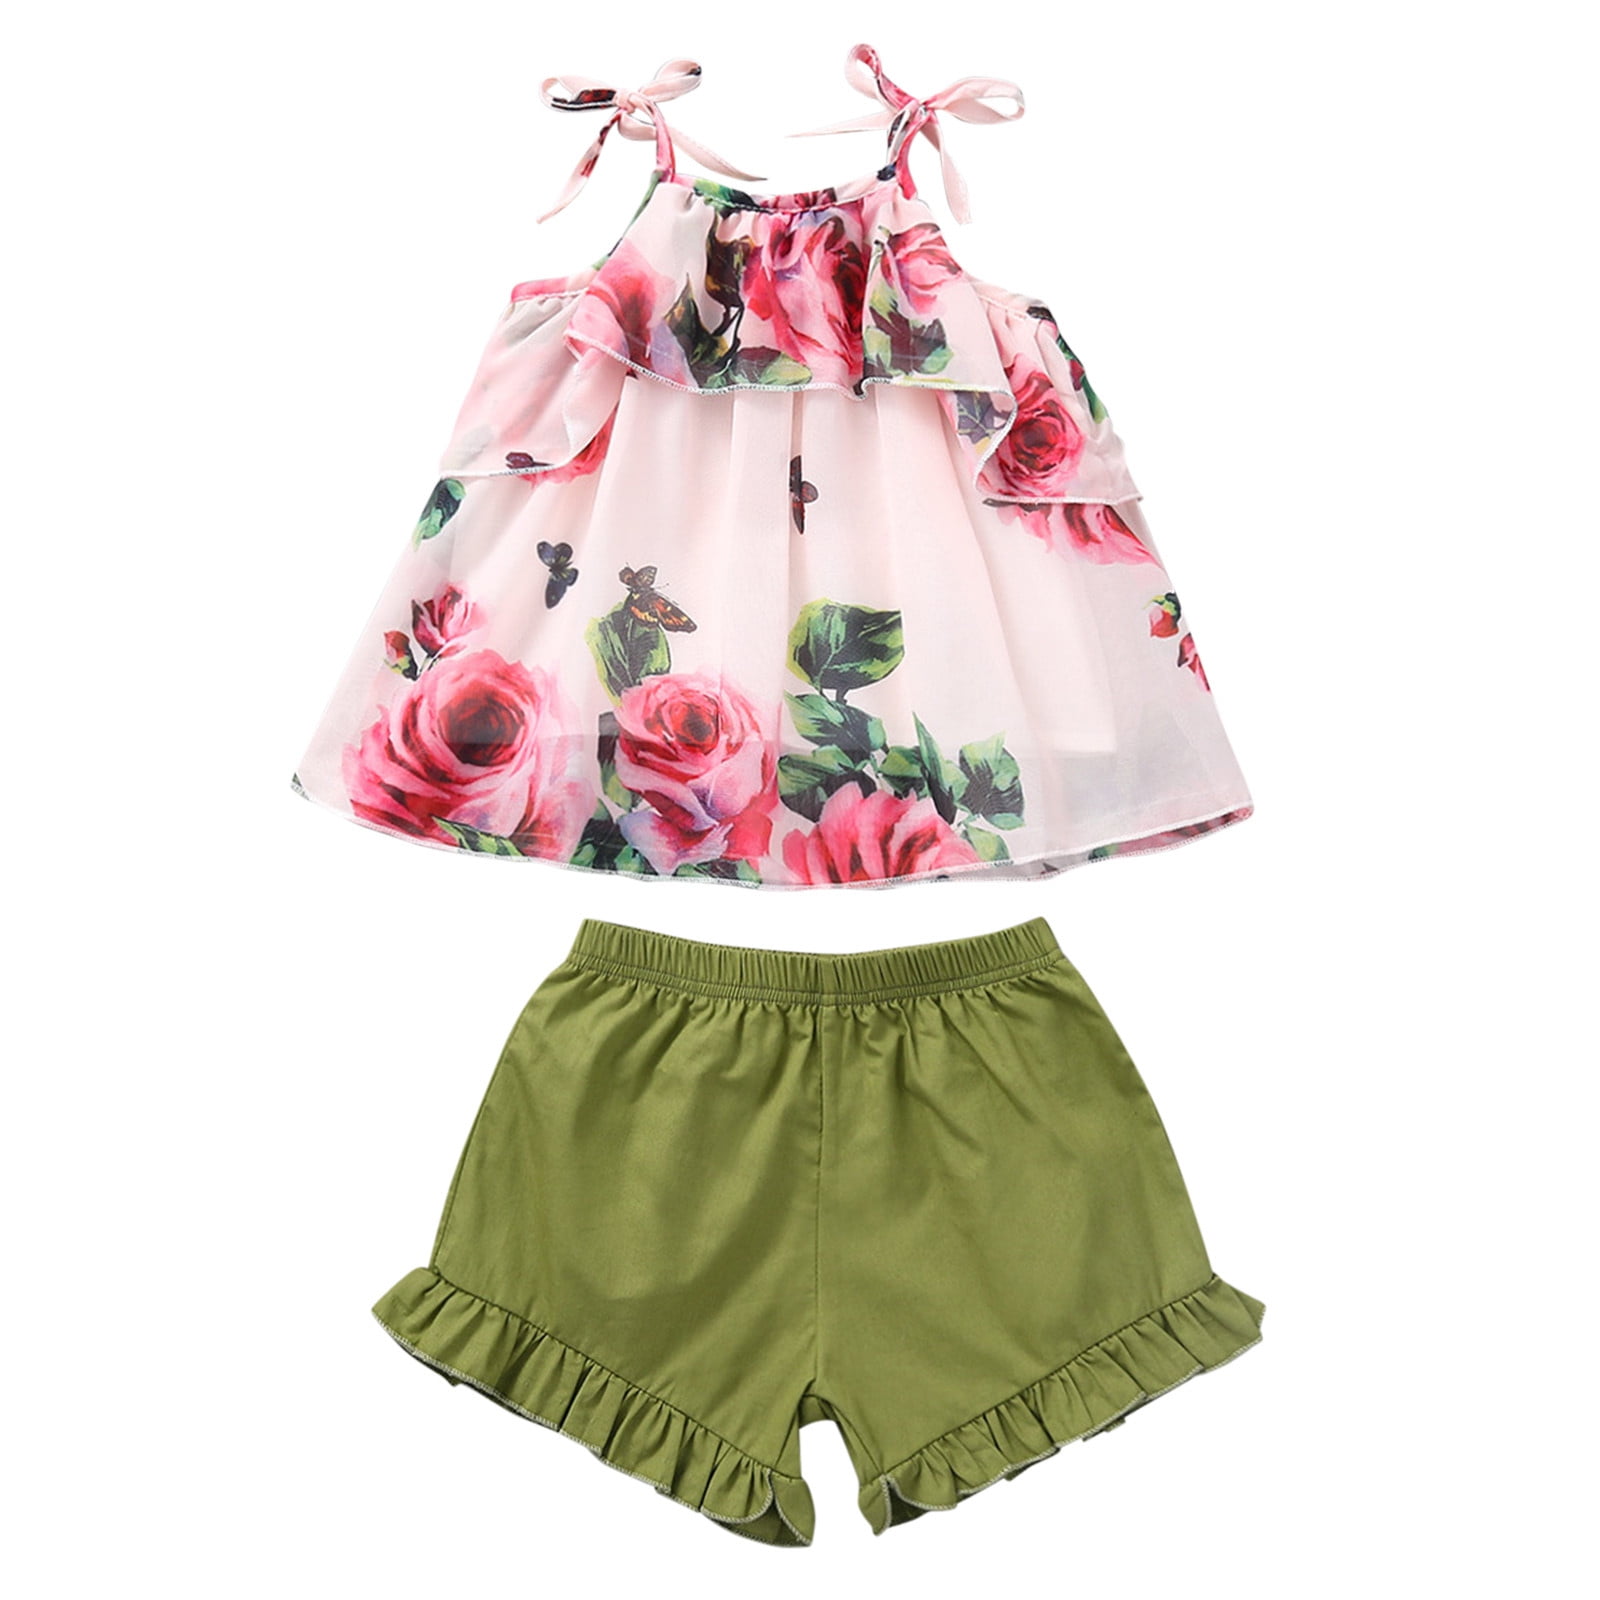 ZHAGHMIN Cute Tops For Girls 10-12 Years Old Child Girls Sleeveless  Suspenders Ribbed Tops Summer Bow Tie Flowers Prints Skirts Outfits Sweats  For